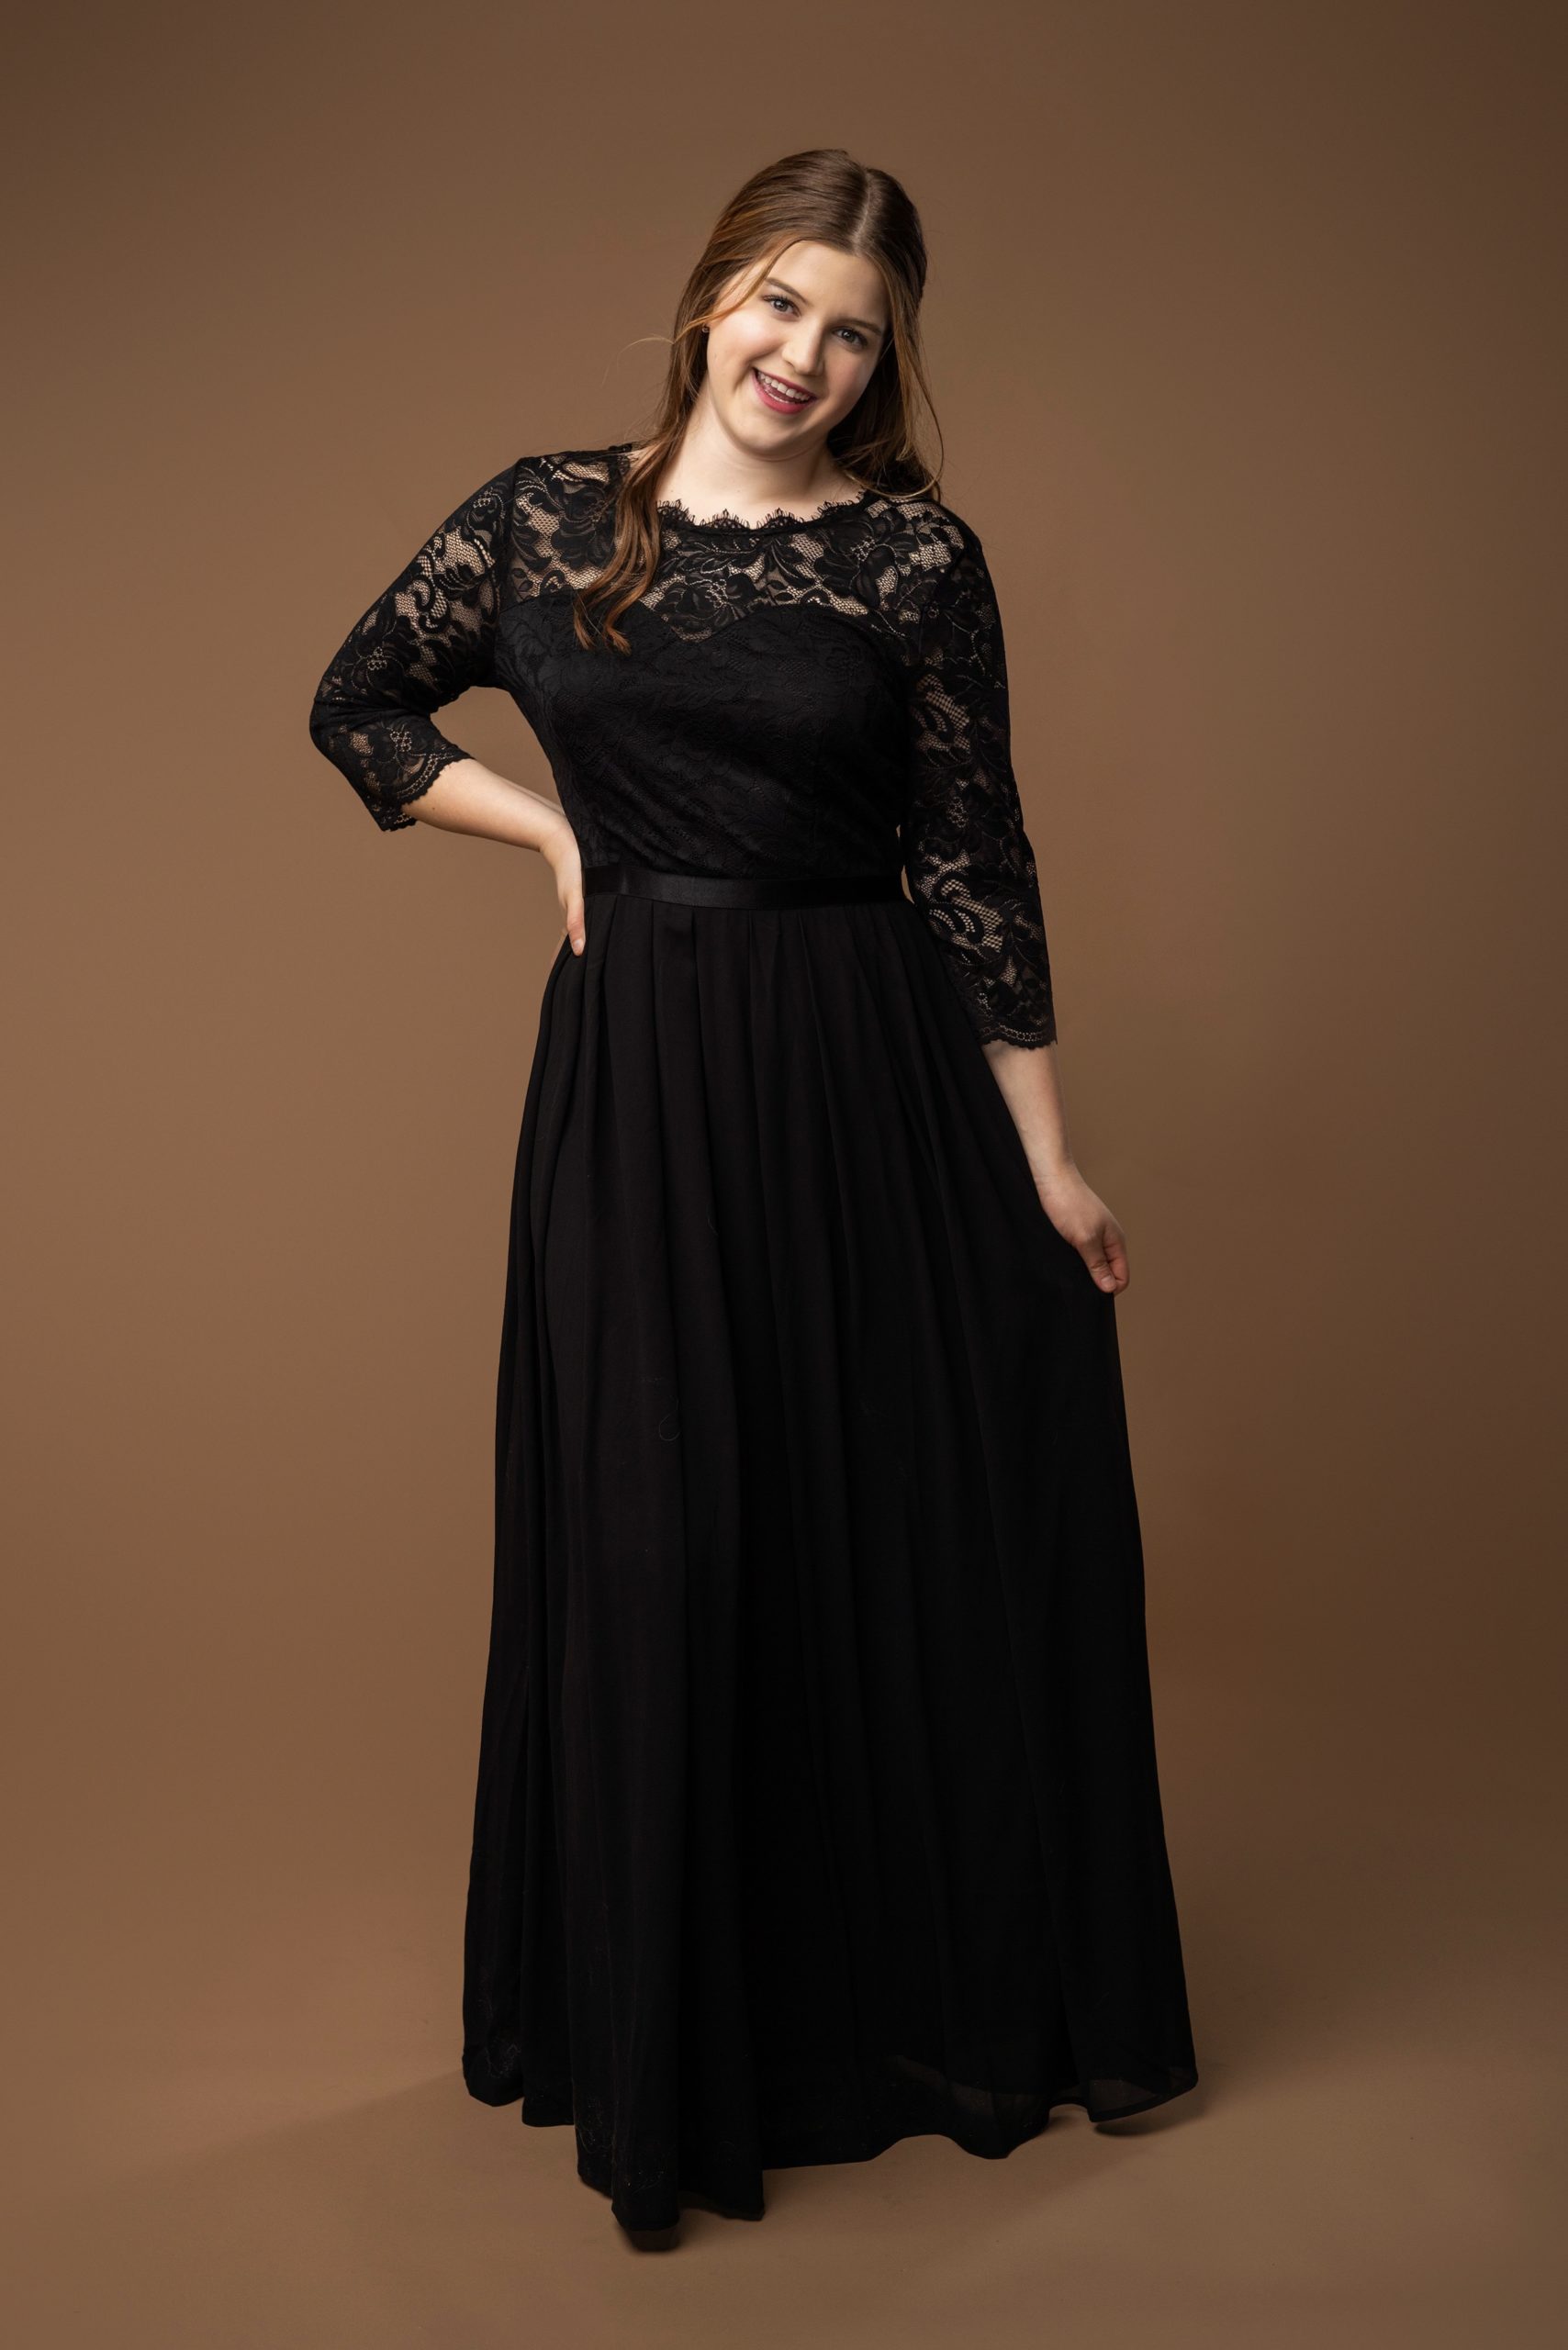 Black Chiffon Long Sleeves Maxi Dress with Floral Lace Top